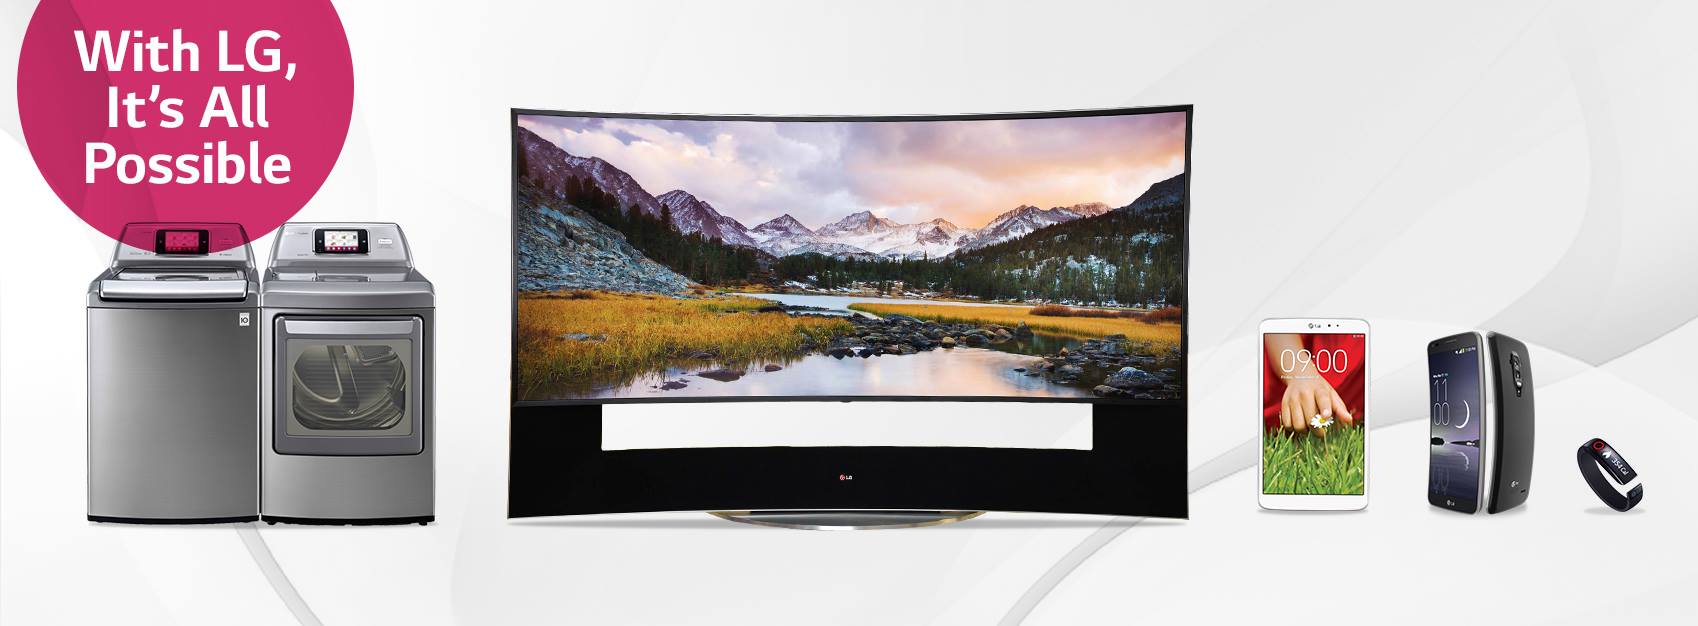 LG was selected by the National Cable & Telecommunications Association as the Official Smart TV Partner for The Cable Show 2014. (image credit: LG Electronics USA)